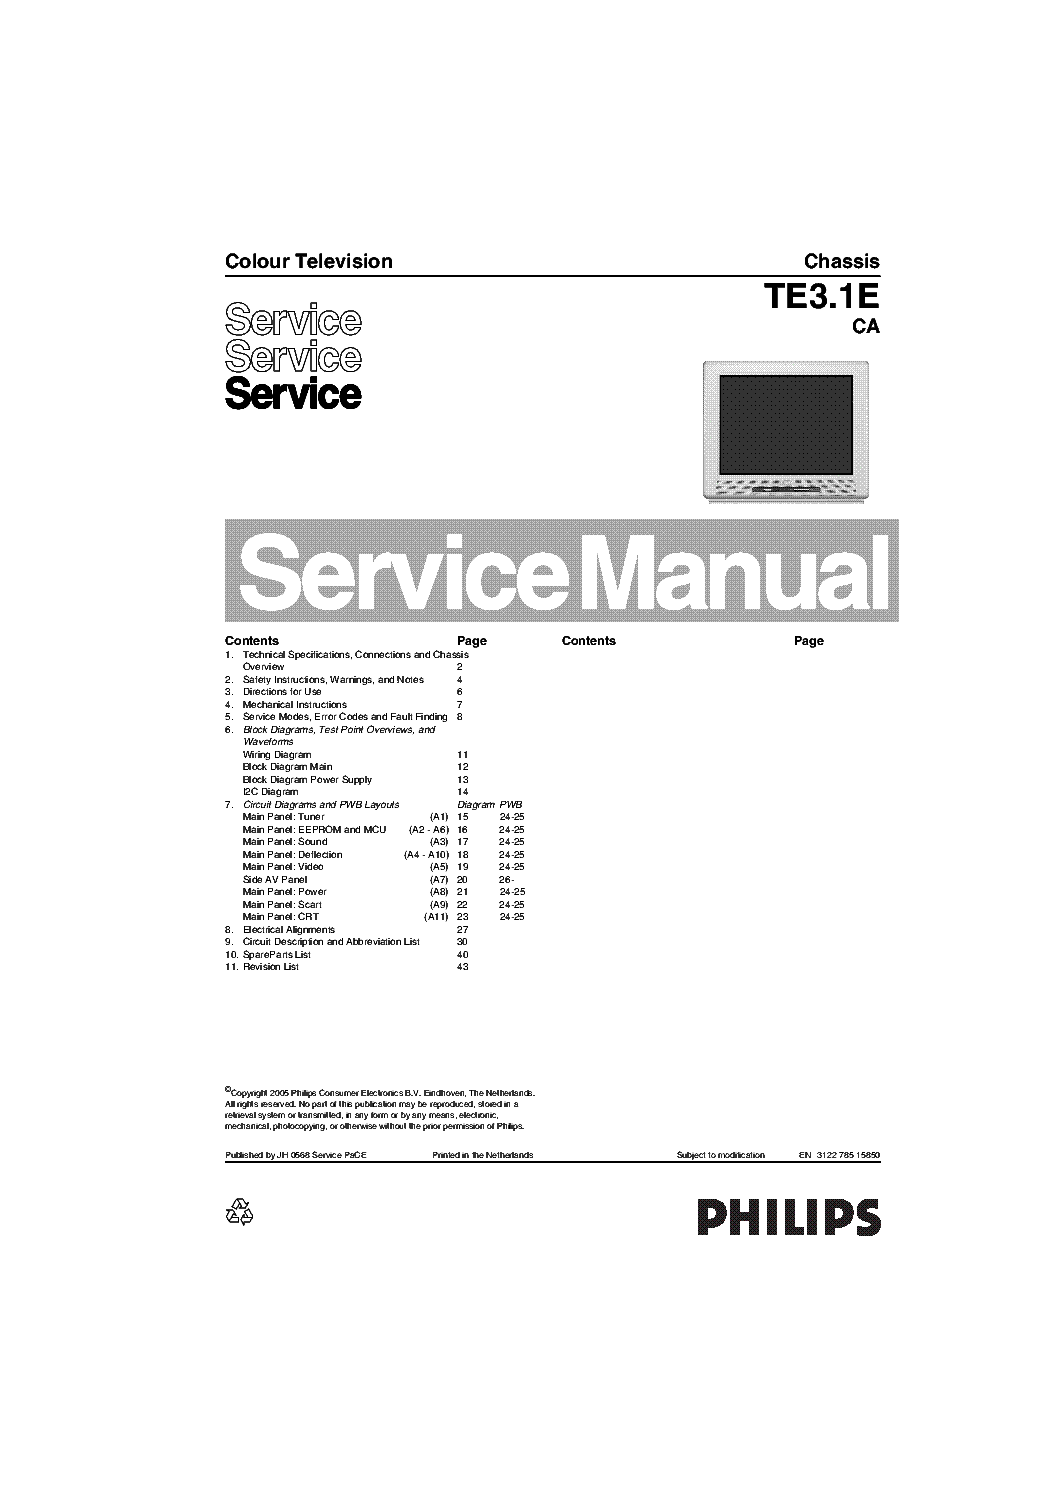 PHILIPS 21PT5401 CHASSIS TE3.1E CA SM service manual (1st page)